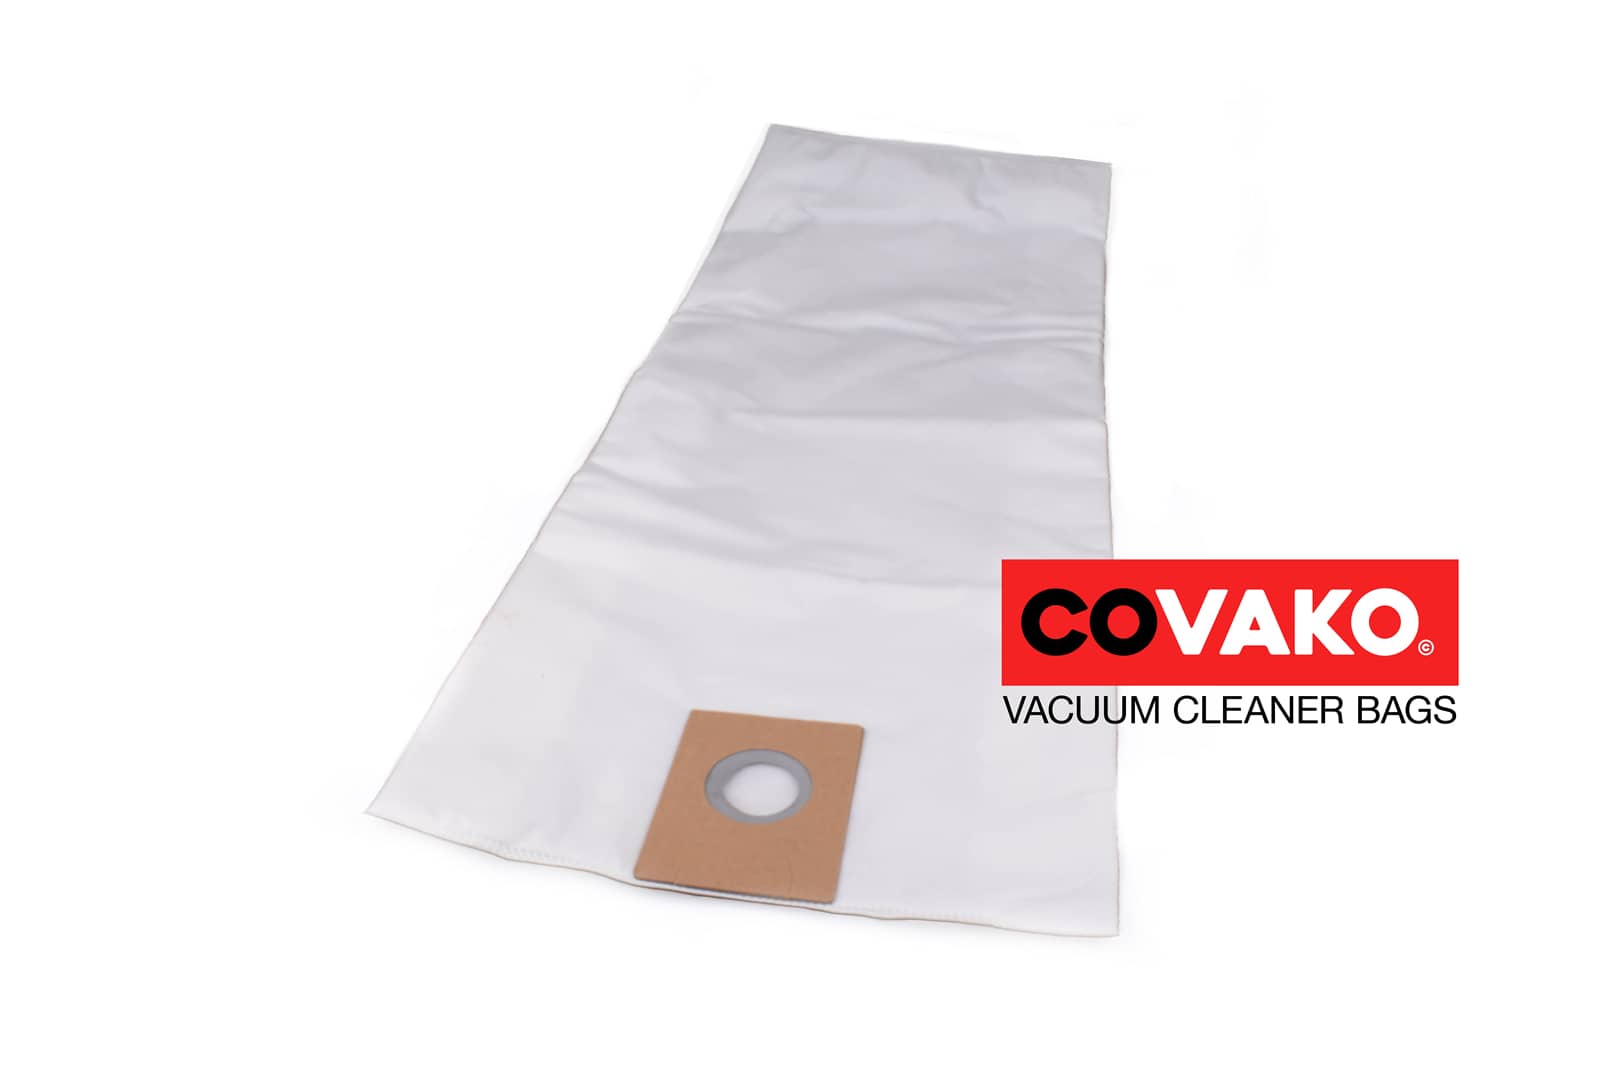 Viper LSU 255 / Synthesis - Viper vacuum cleaner bags